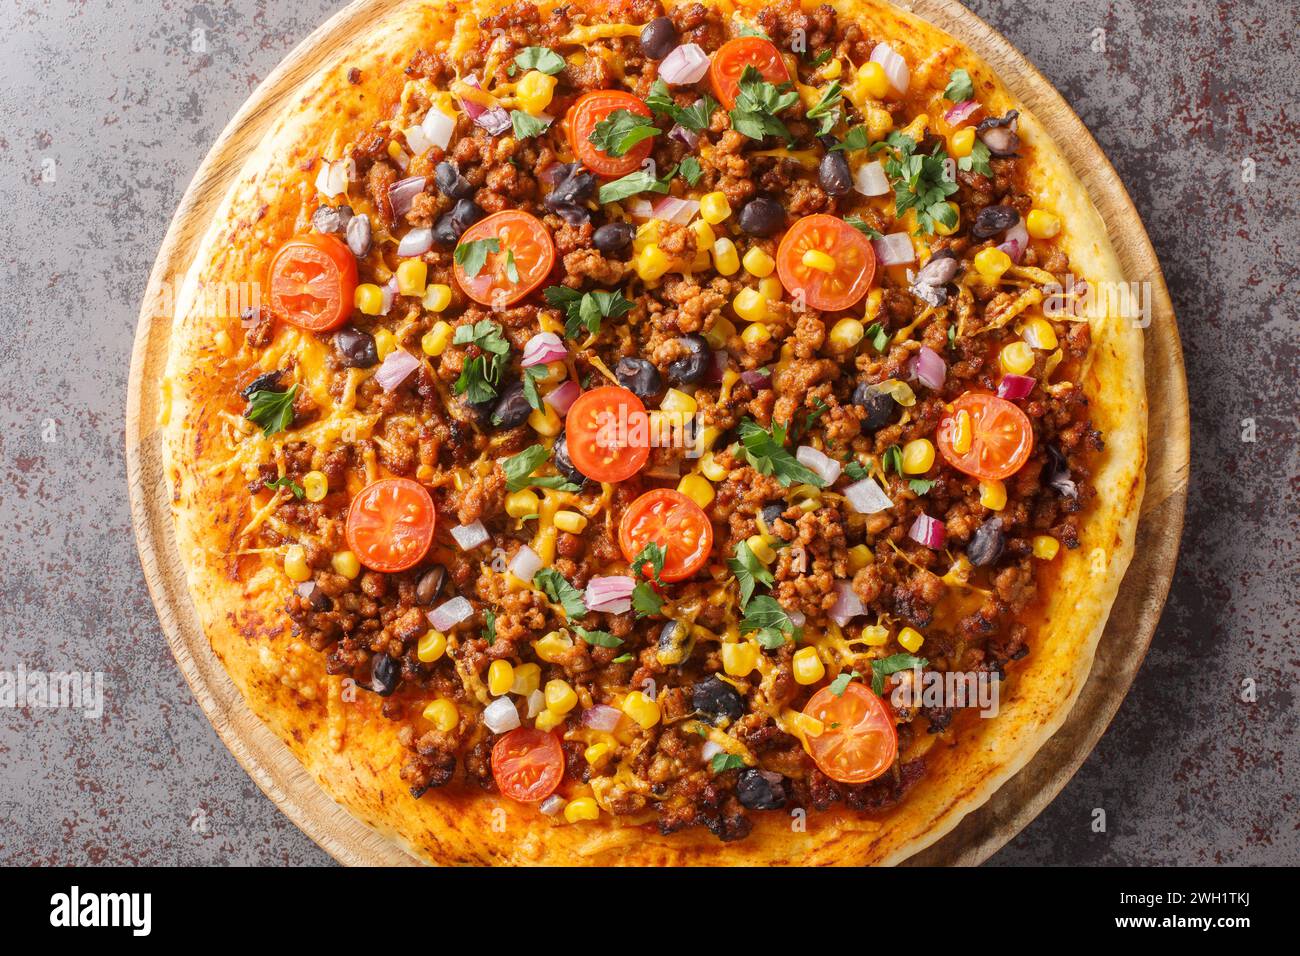 Homemade Tex Mex pizza with ground beef, vegetables, cheddar cheese and Mexican spices close-up on a wooden board on the table. Horizontal top view fr Stock Photo